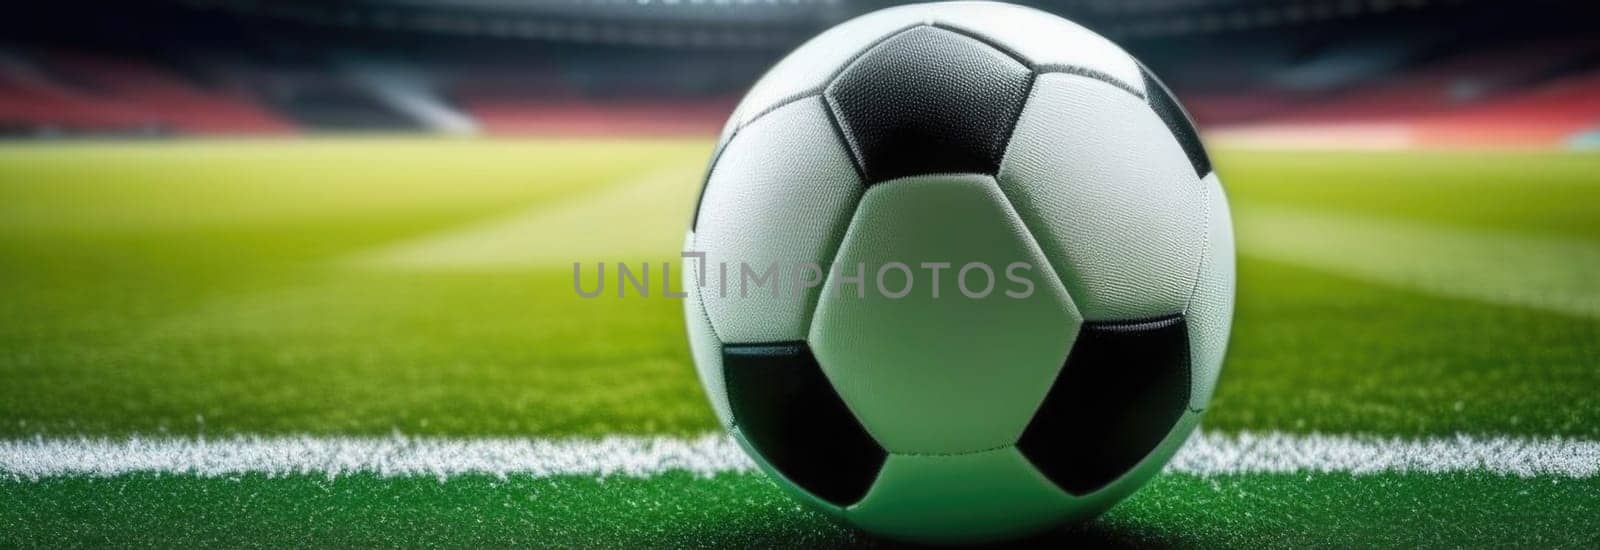 Soccer ball rests on grass of green field in front of majestic lit up, creating exciting atmosphere stadium. Scene captures essence of game, ready for action, excitement. Advertising, banner, print